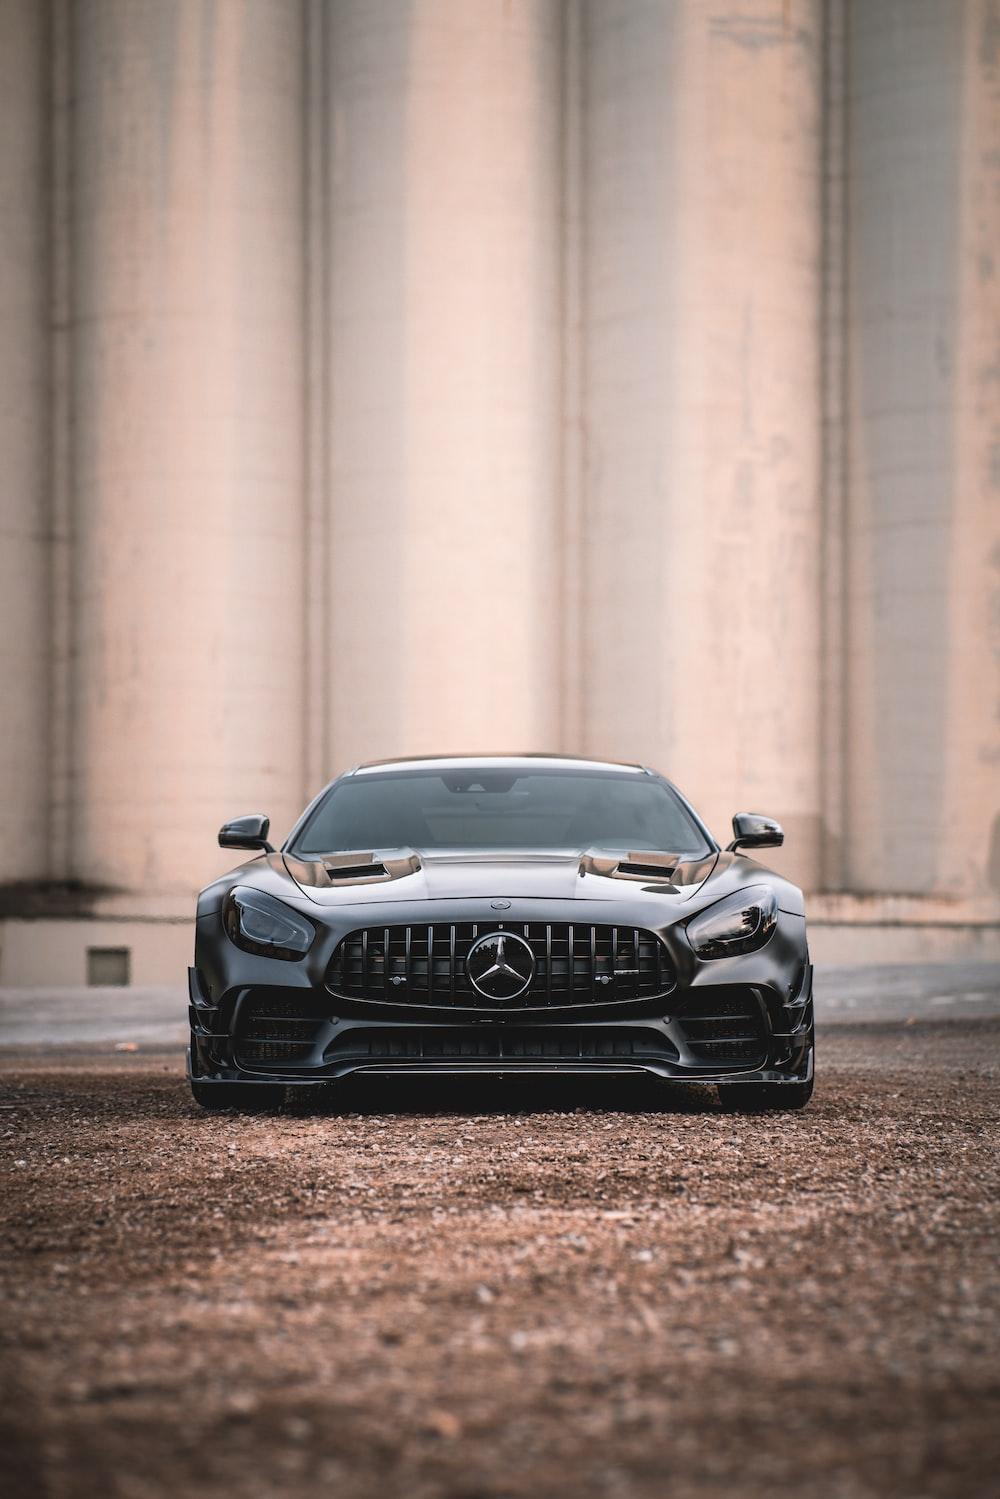 Amg Pictures Image